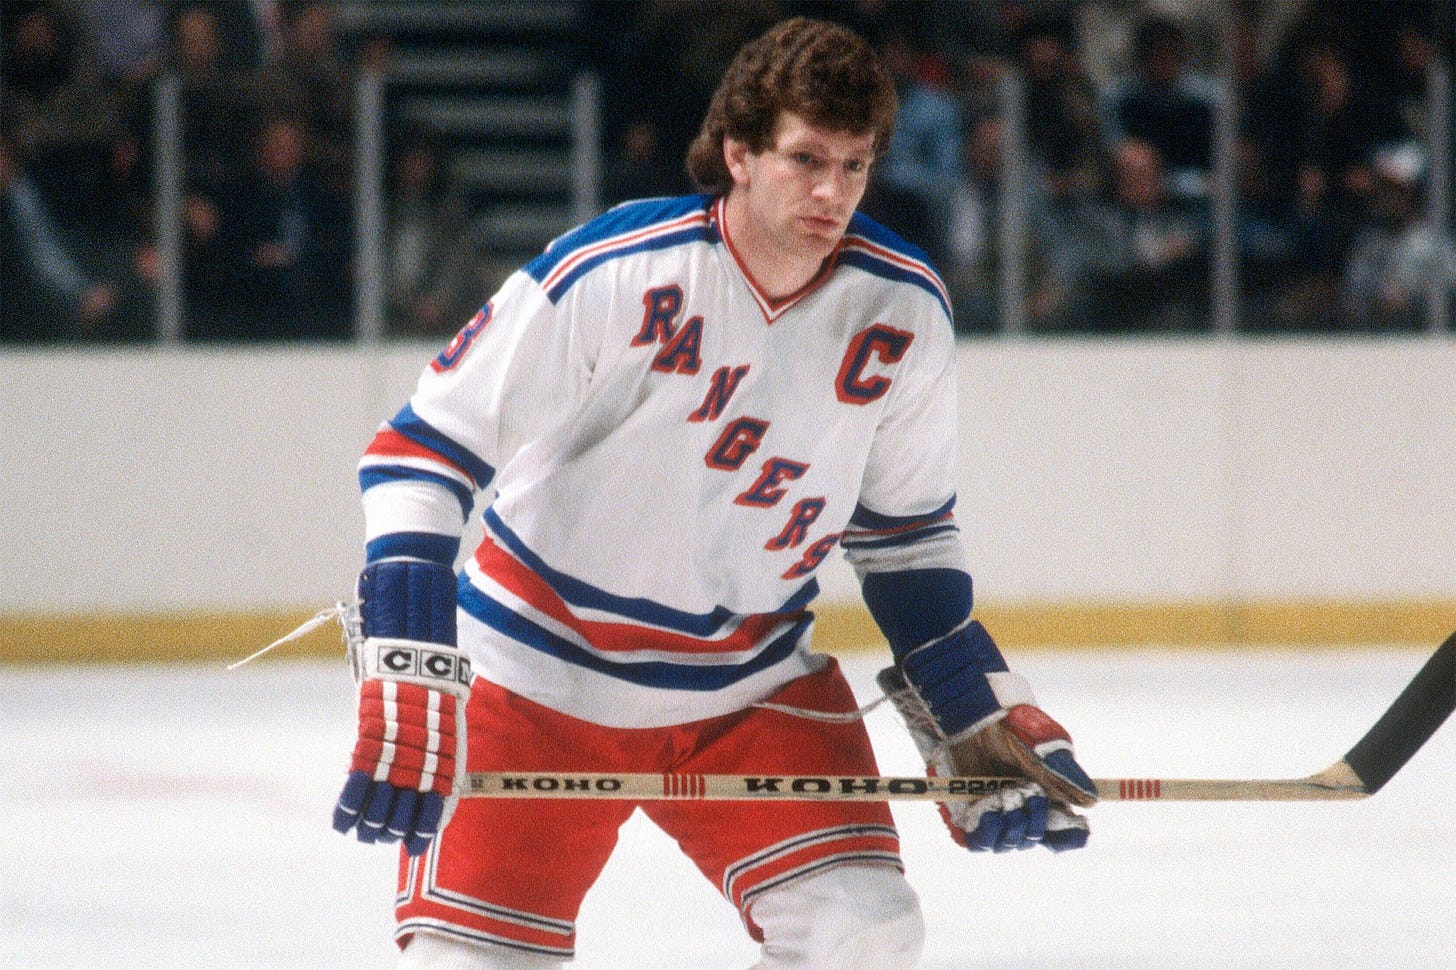 Son of former Rangers star Barry Beck stabbed to death